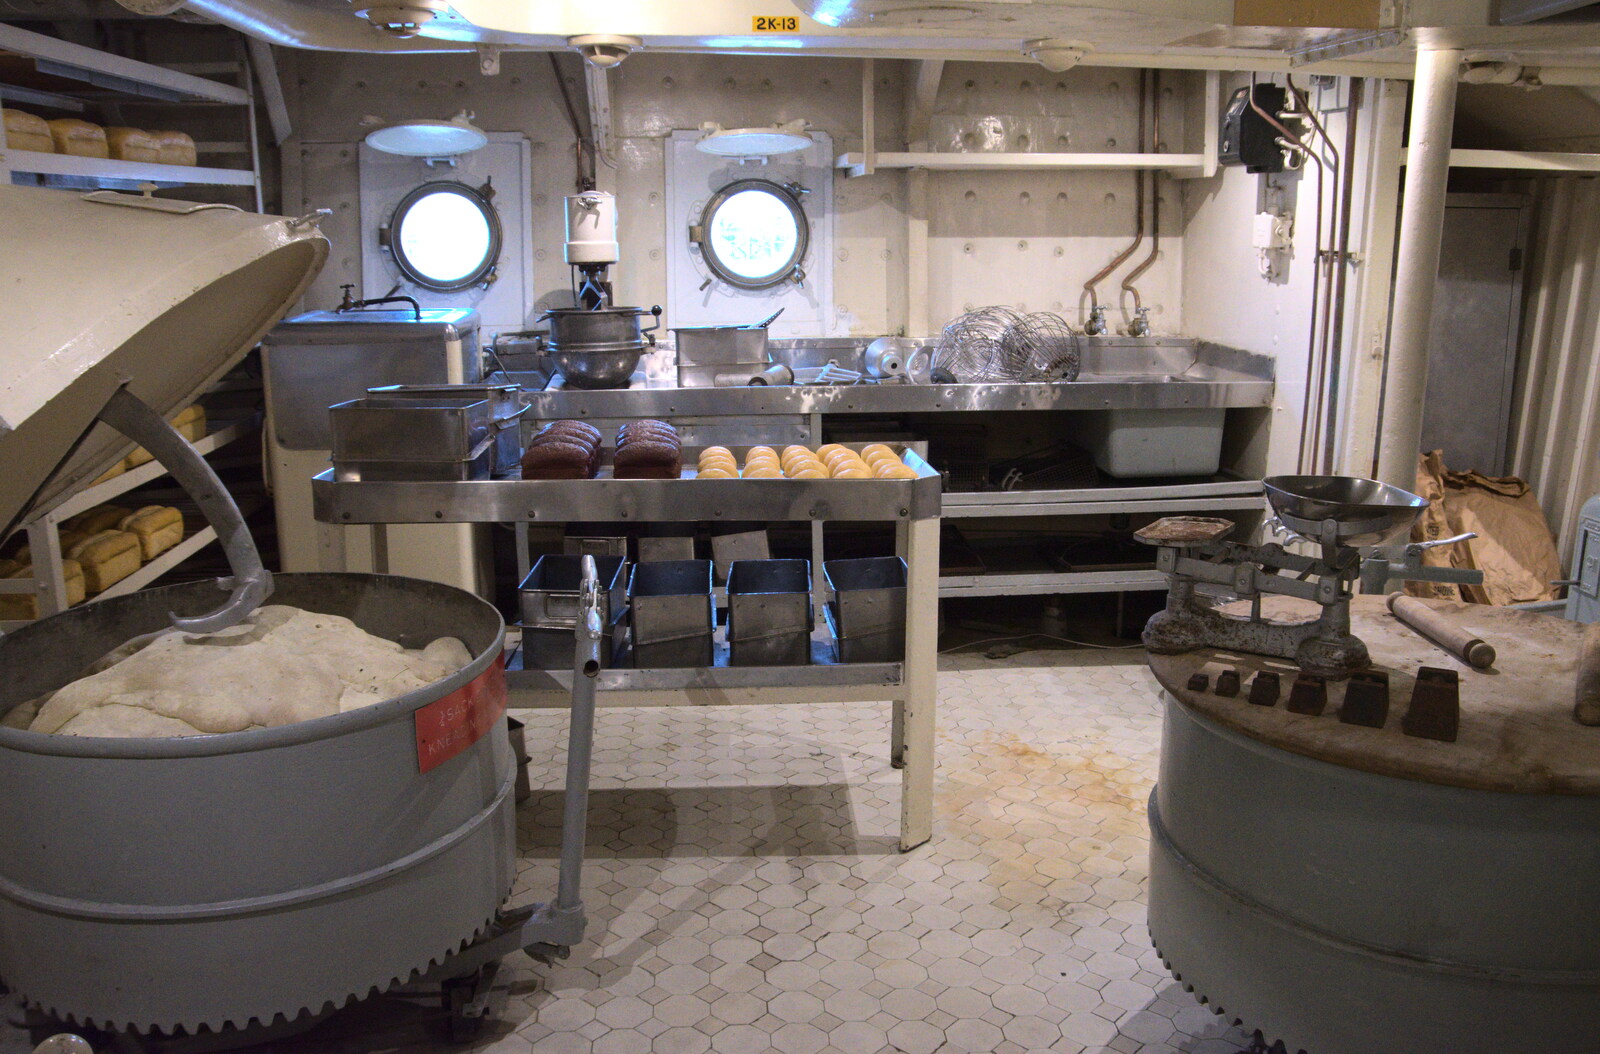 The bakery from HMS Belfast and the South Bank, Southwark, London - 17th February 2020